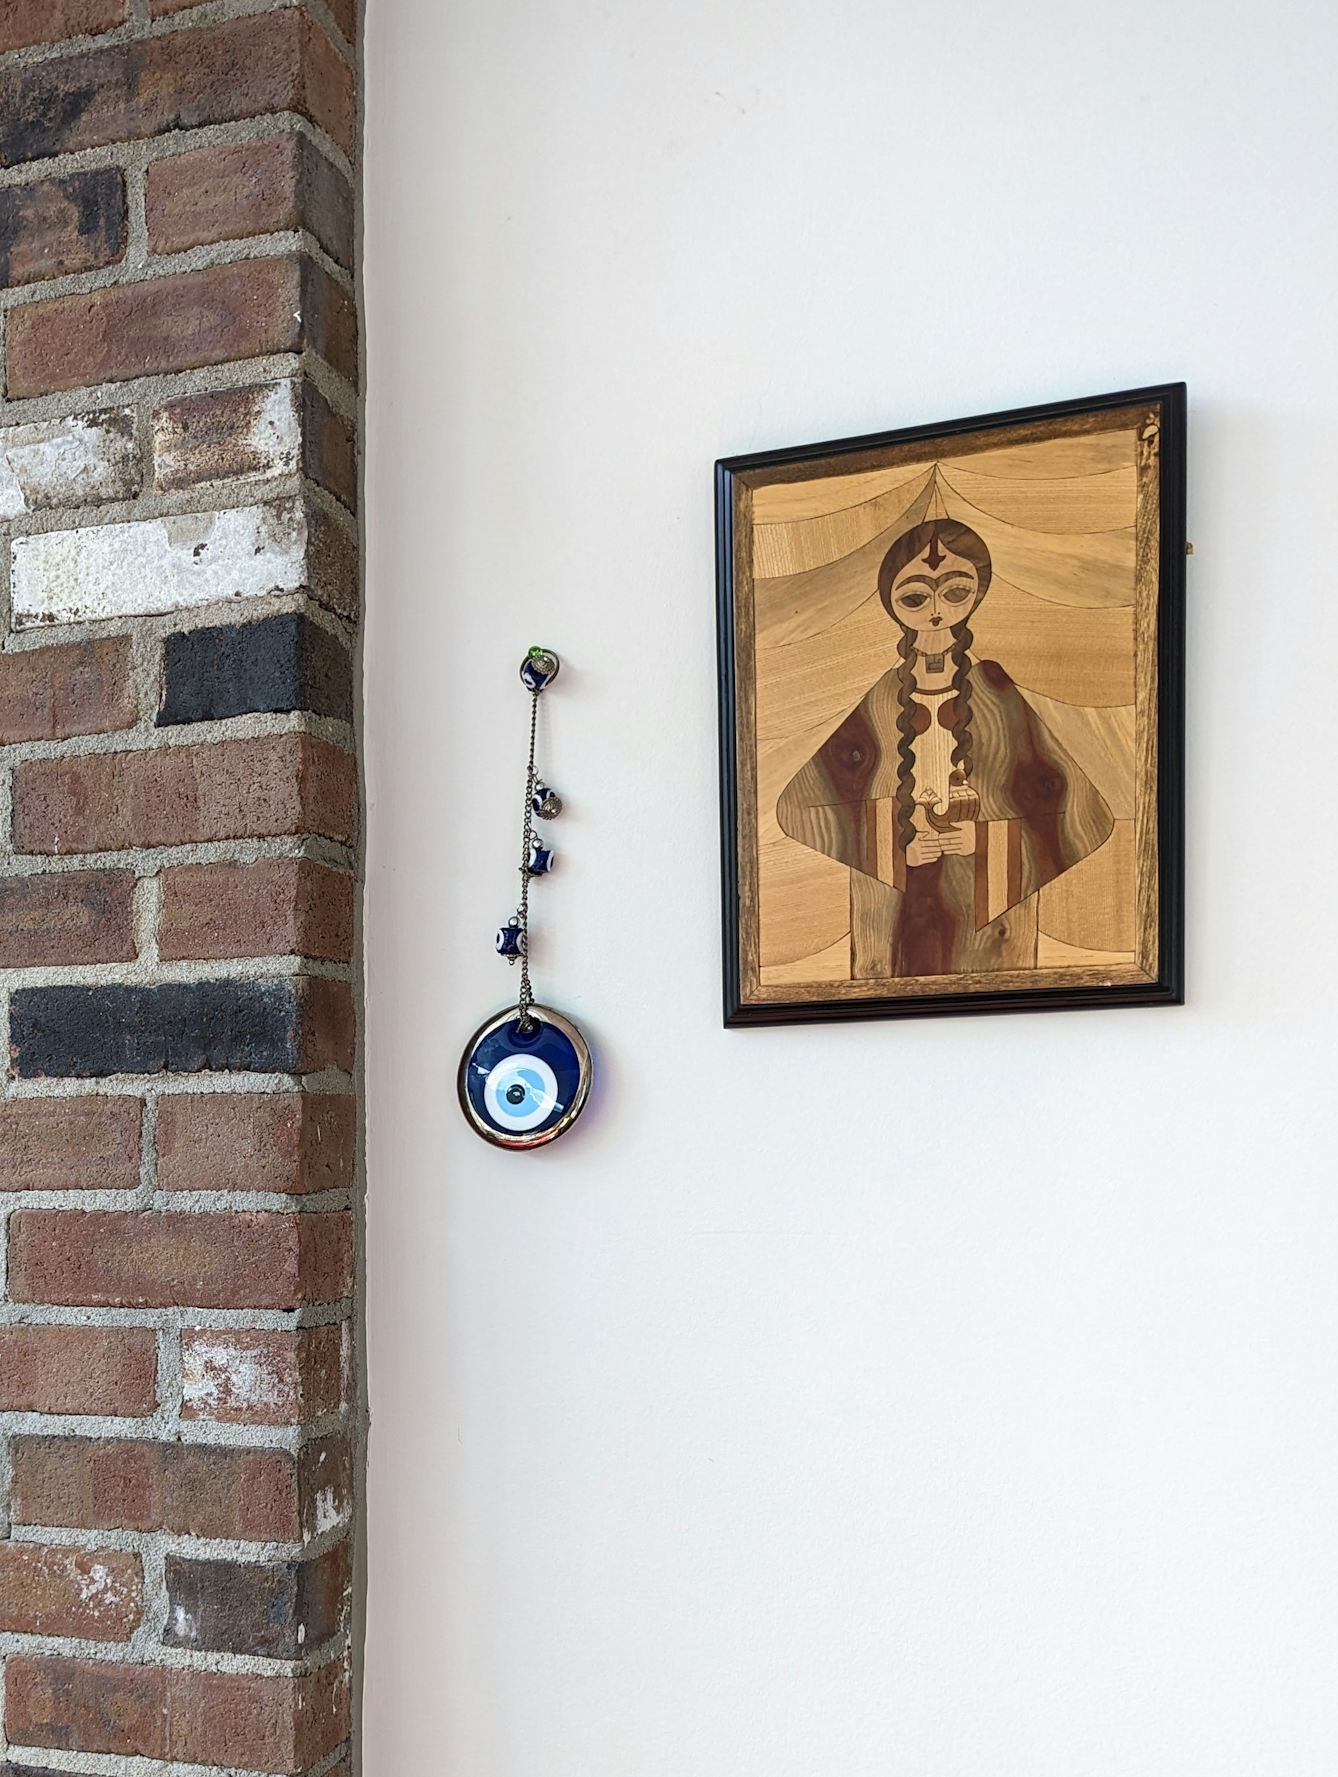 A large glass disc of concentric blue, white and black circles hangs on a single metal chain, with three smaller blue glass beads attached to the chain. The chain hangs on a plain wall between a marquetry artwork of a young wo,man and the edge of a brick pillar.